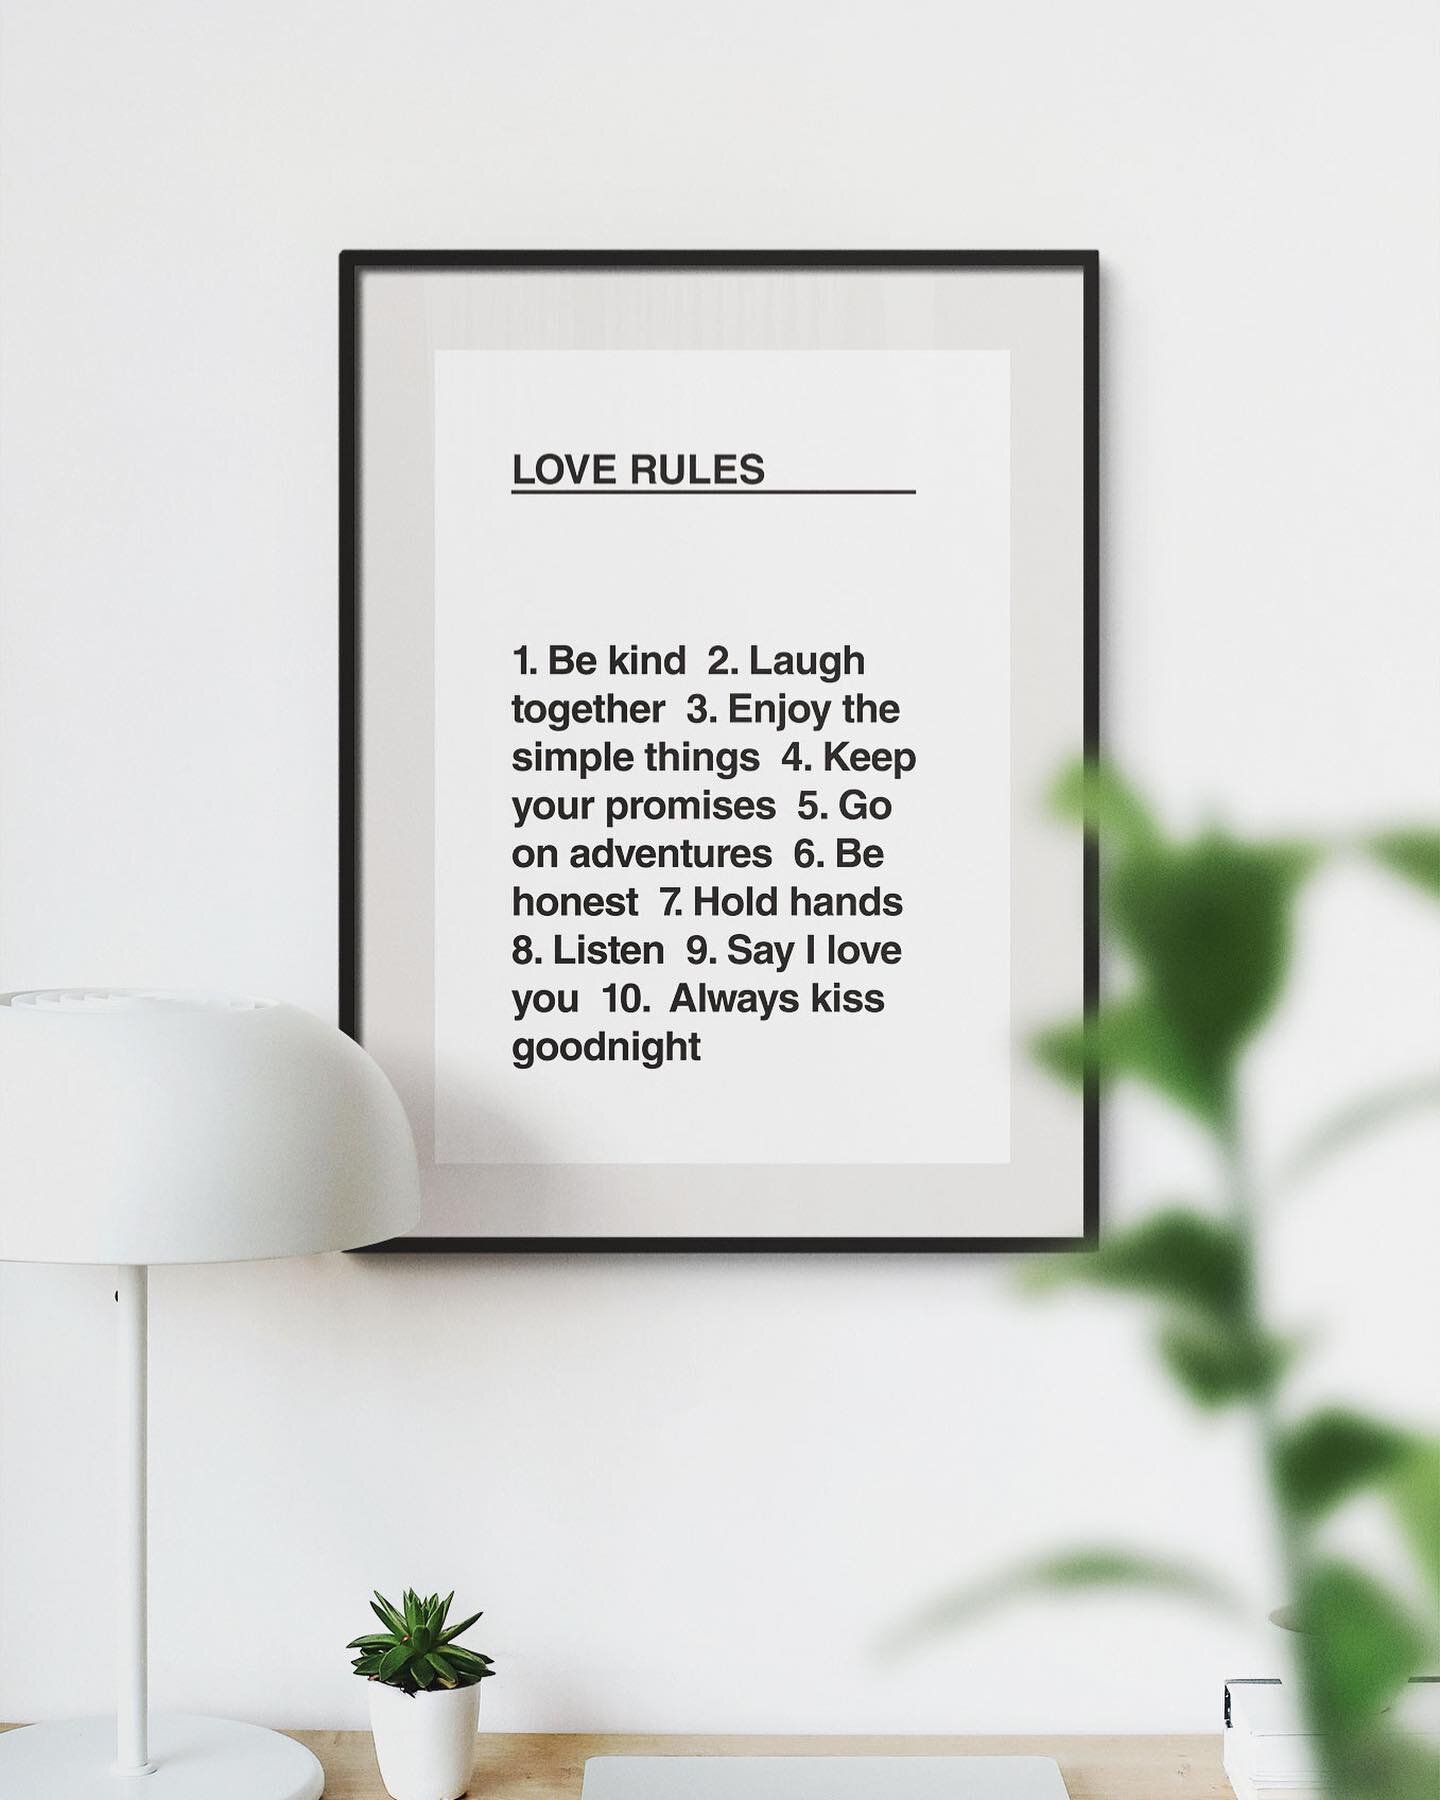 10 simple rules to love by ❤️.